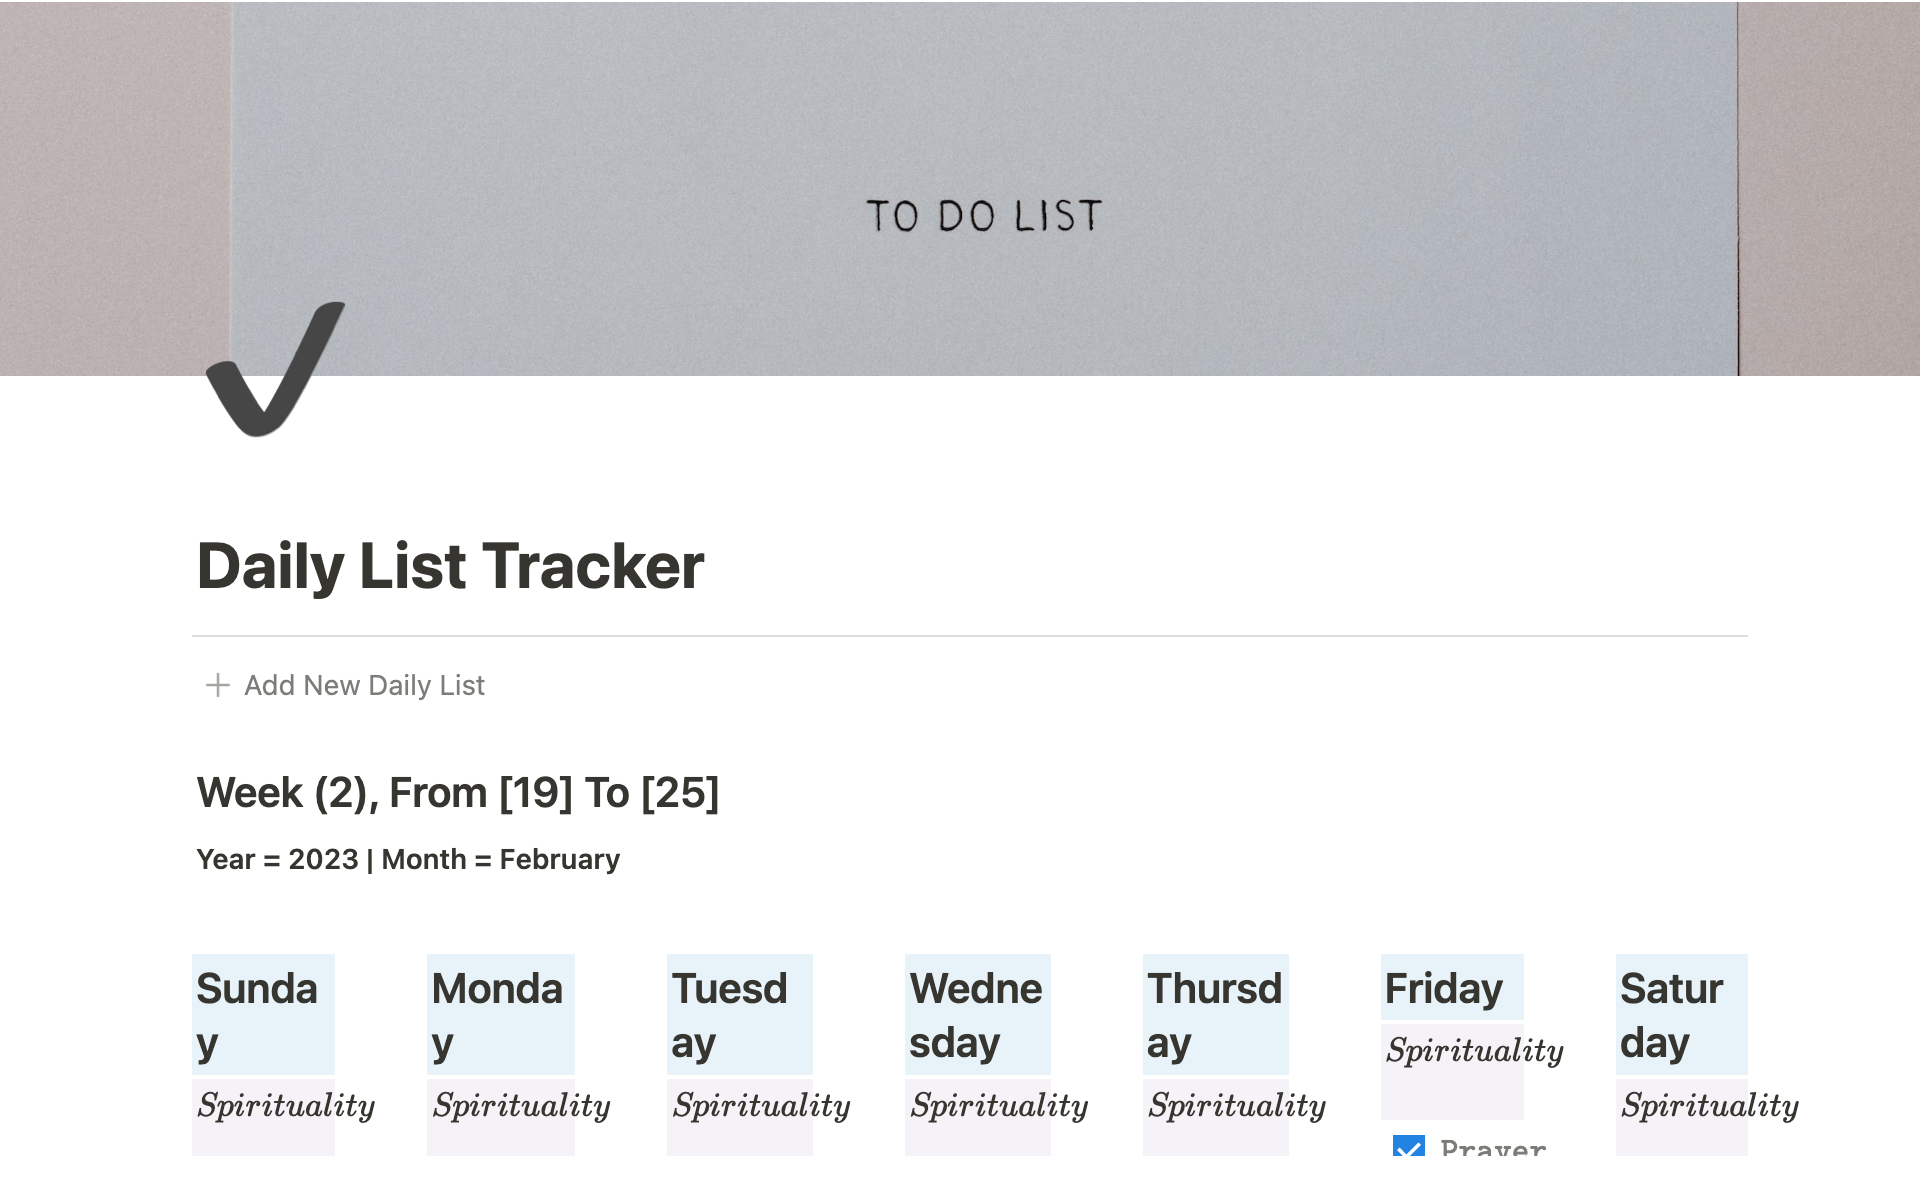 Reach your goals by creating a habit tracker in Notion